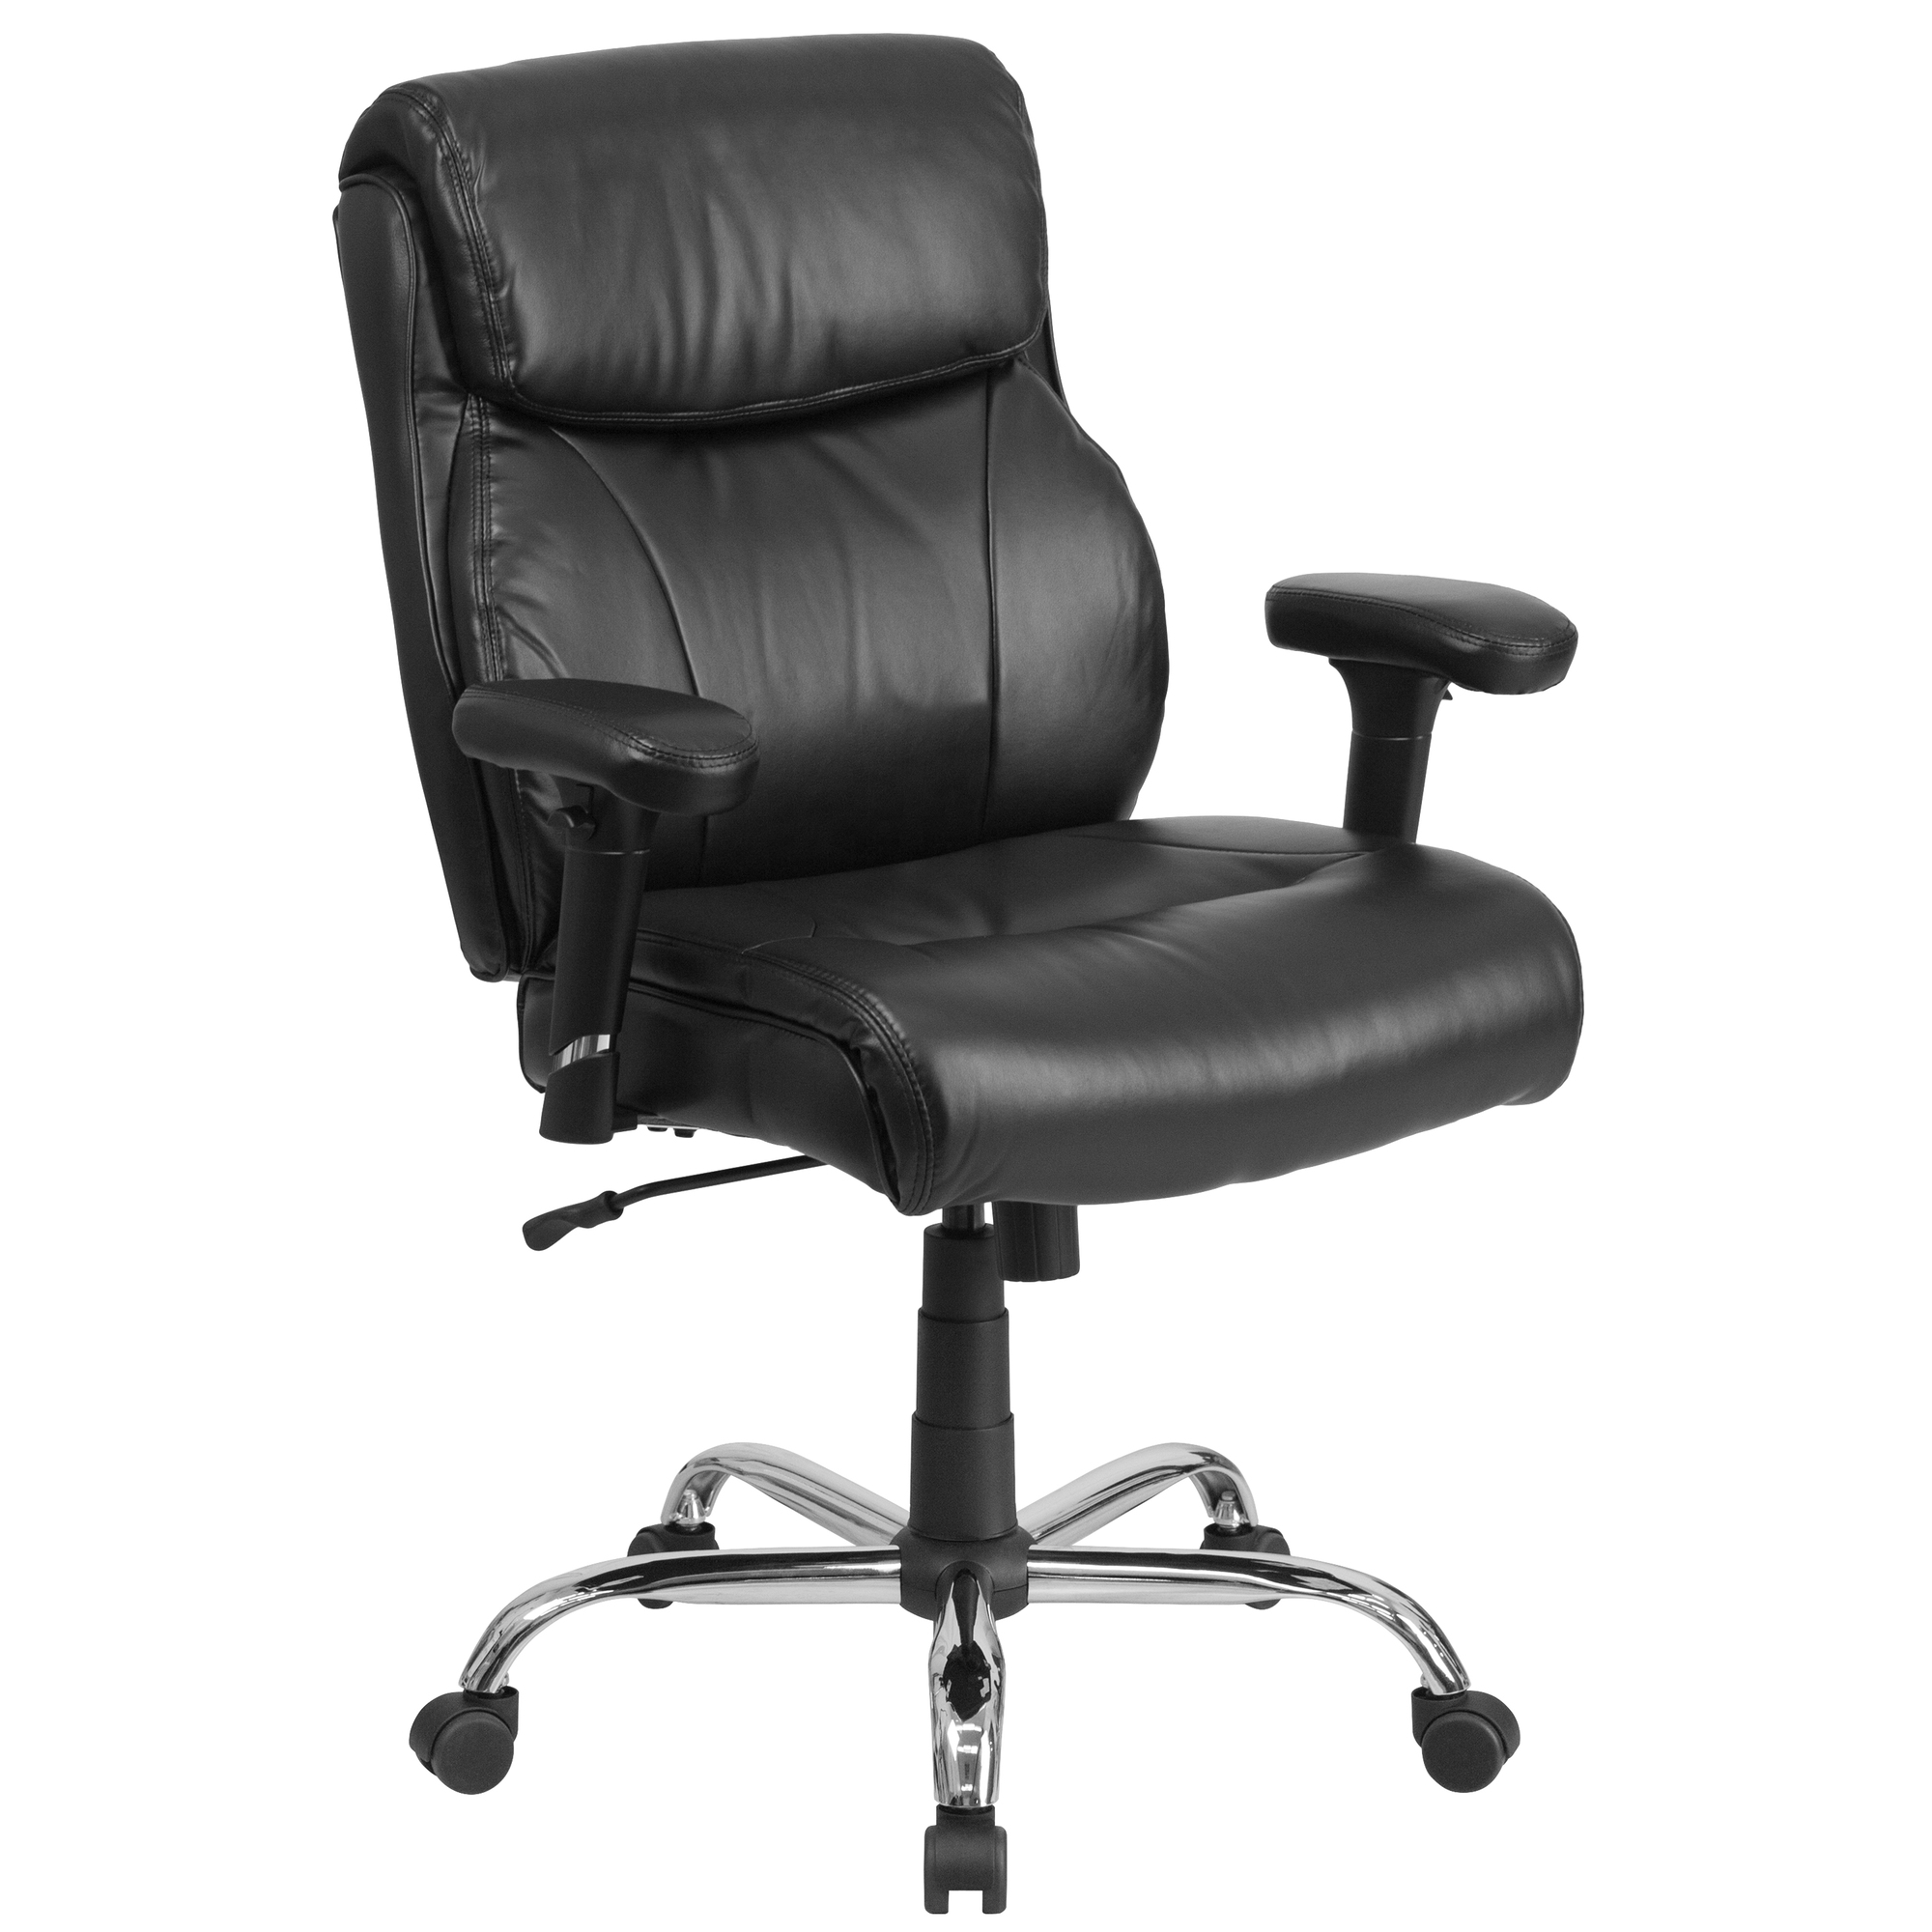 400 lb. Rated Mid-Back Black LeatherSoft Chair, Primary Color Black, Included (qty.) 1, Model - Flash Furniture GO2031LEA